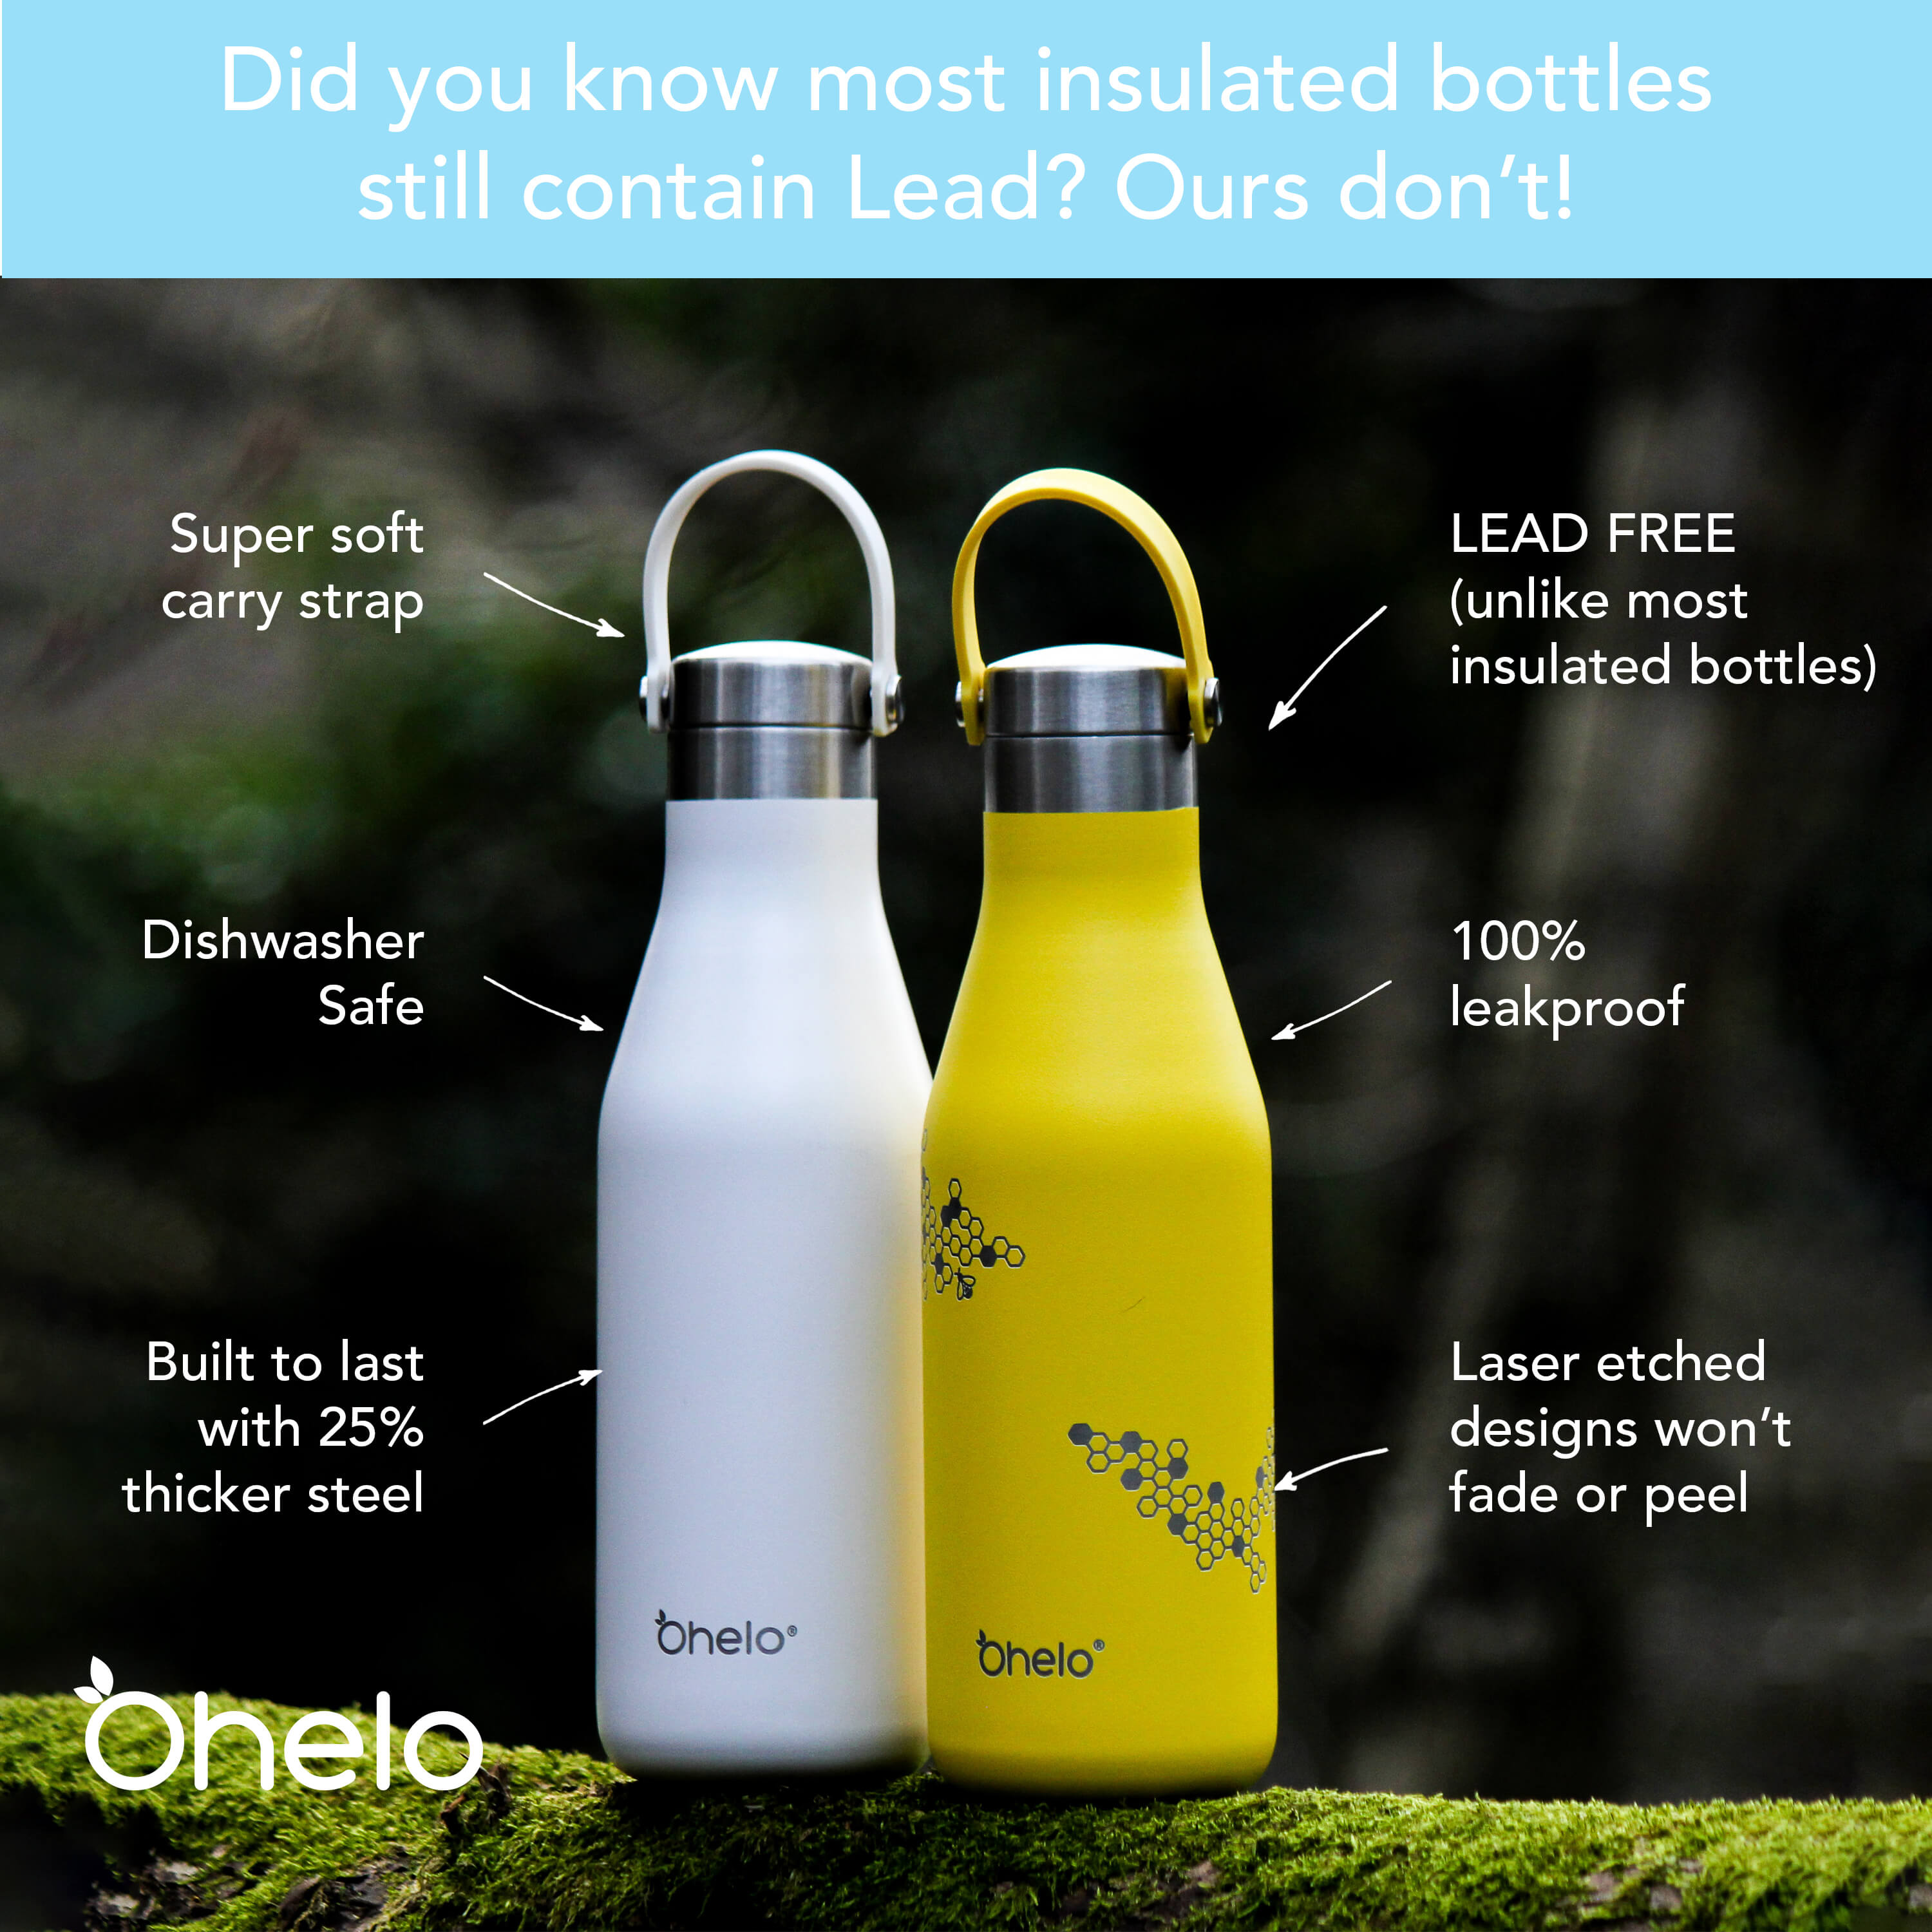 Did you know almost all insulated water bottles still contain toxic lead? Ours dont! Image shows 2 Ohelo steel water bottles in a forest with other USPs